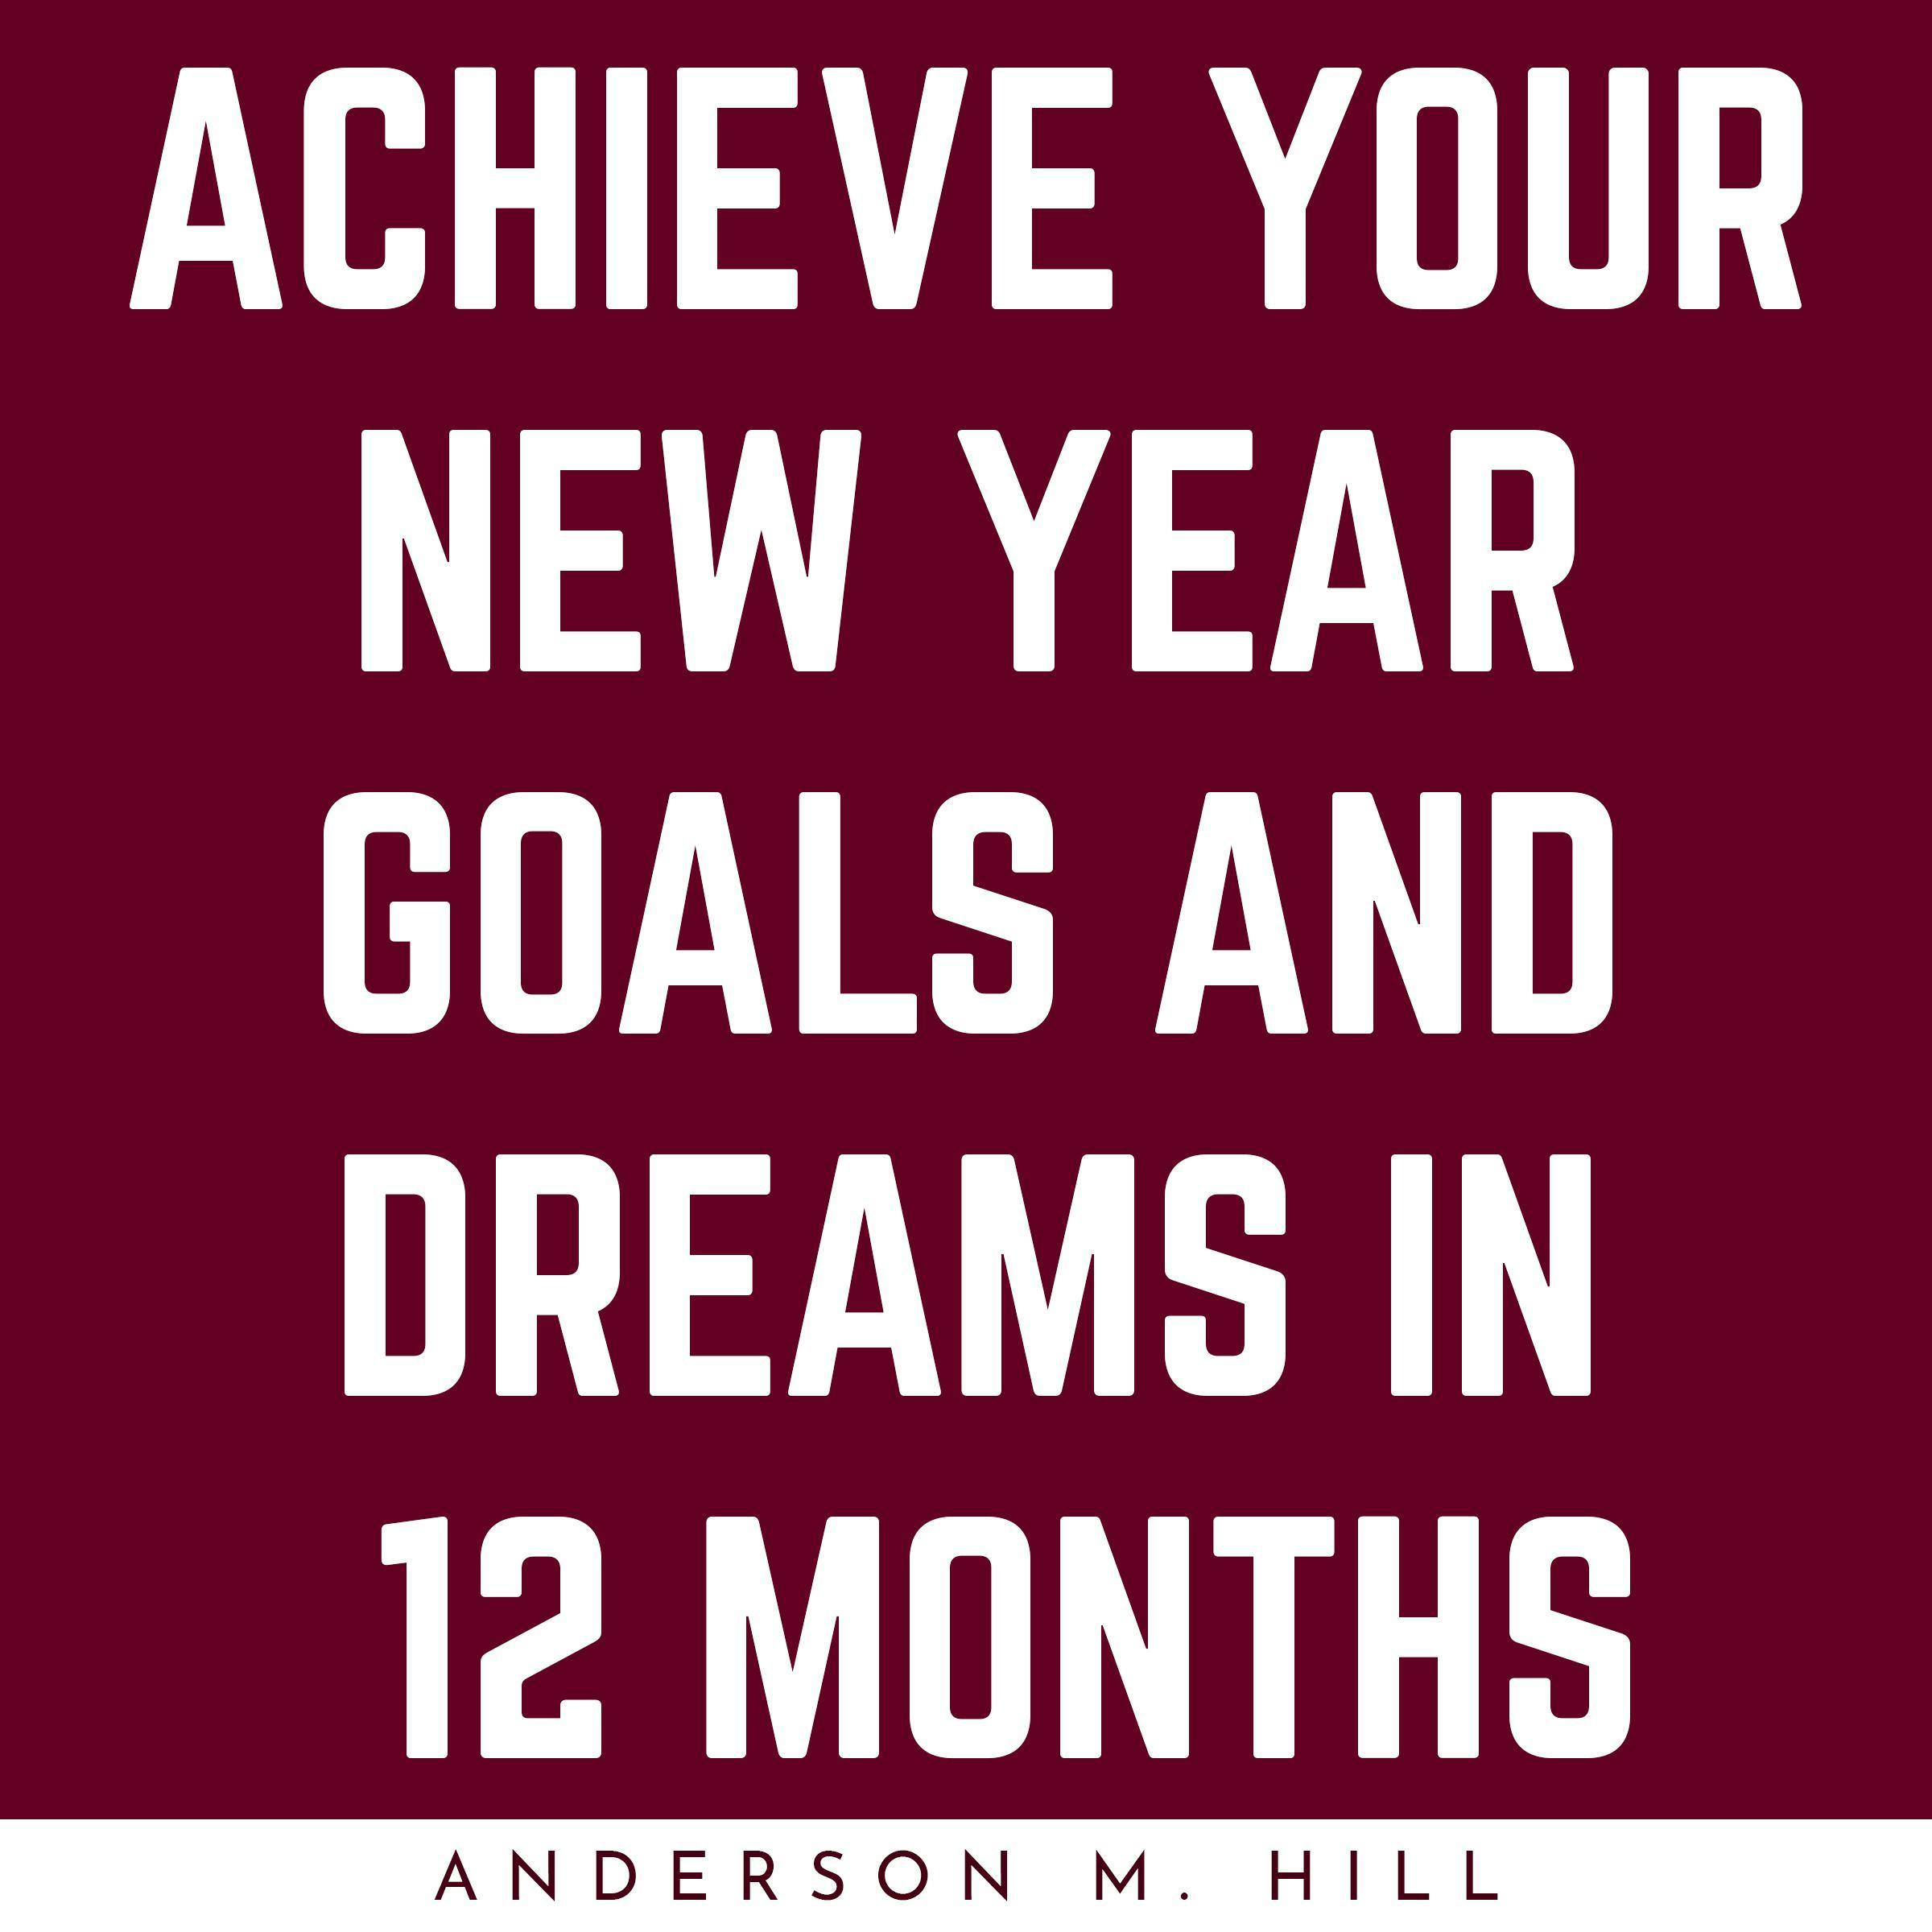 ACHIEVE YOUR NEW YEAR GOALS AND DREAMS IN 12 MONTHS - Anderson M. Hill